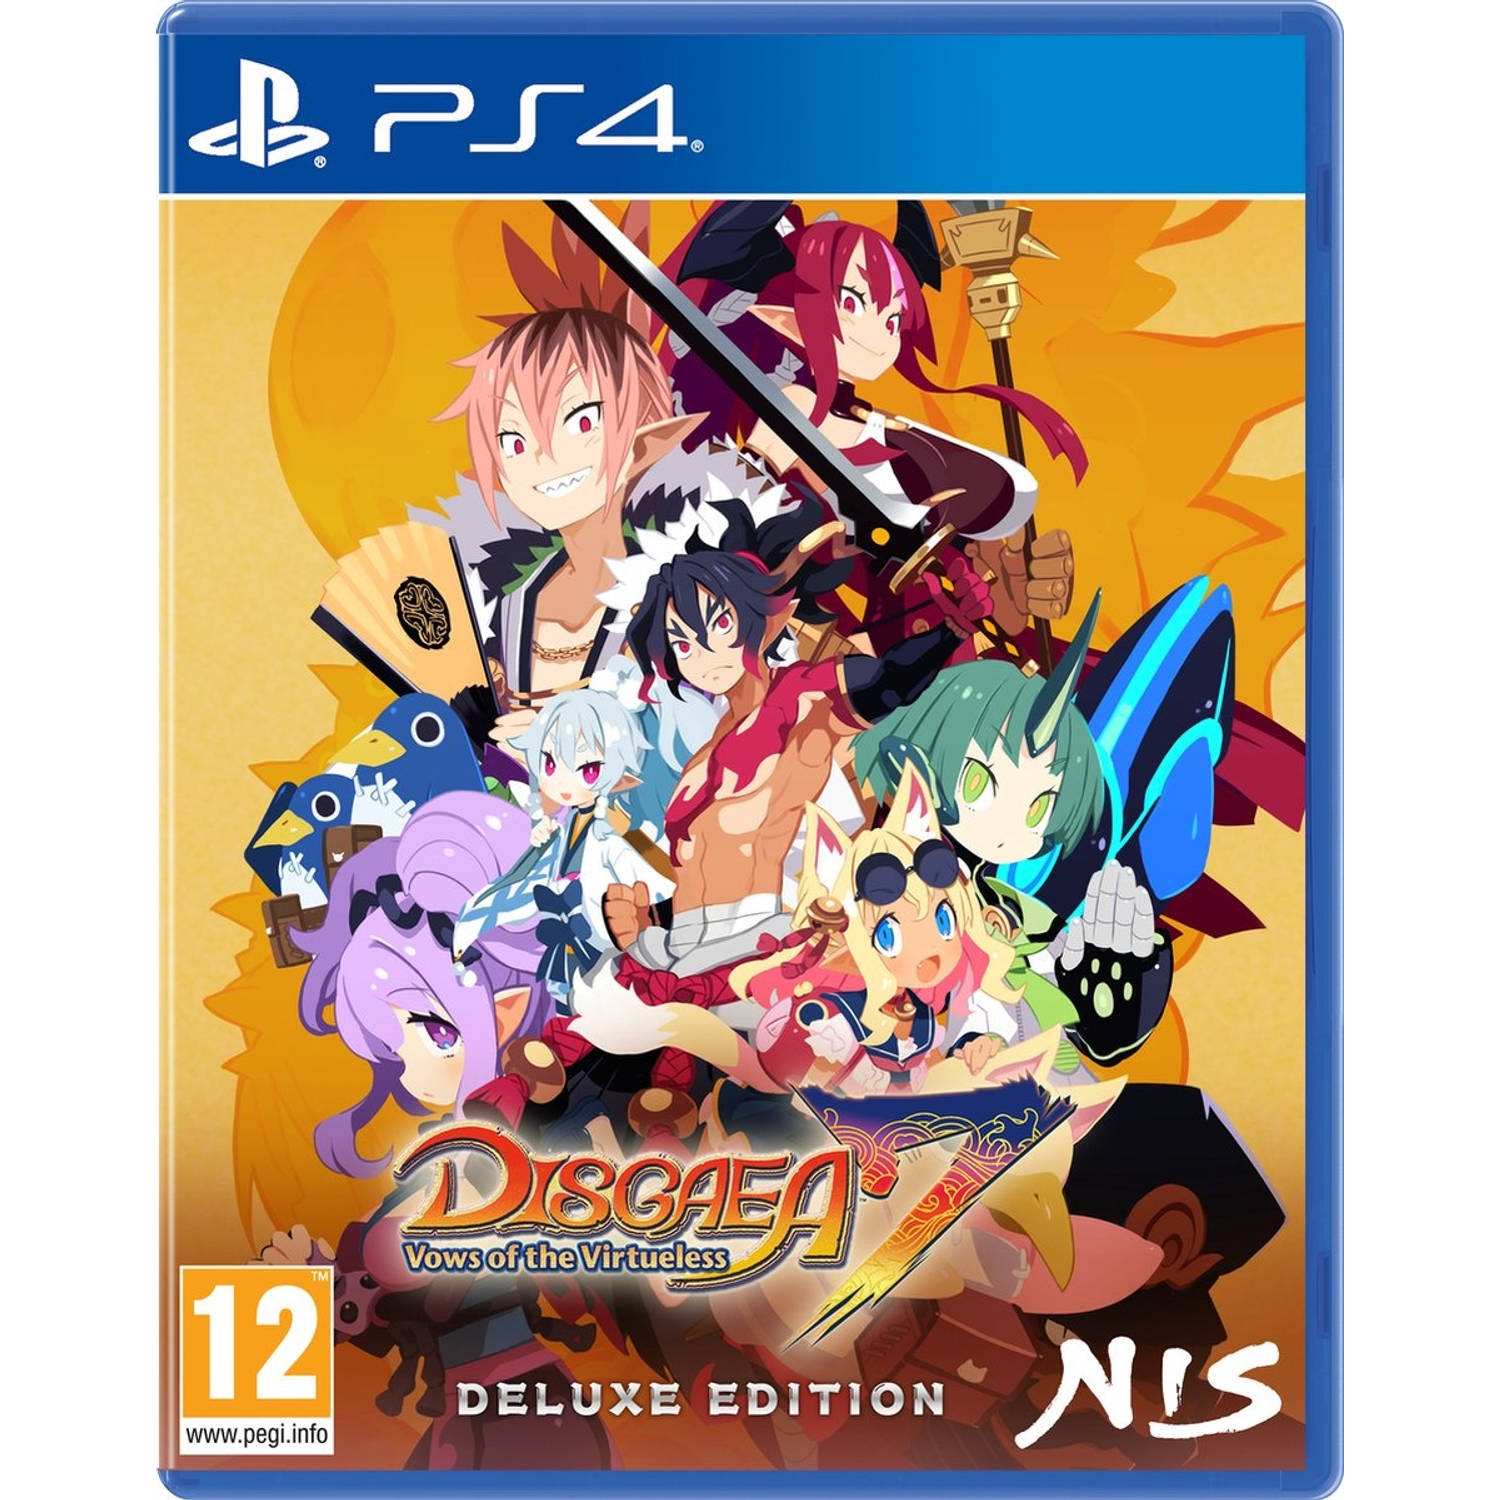 Disgaea 7: Vows of the Virtueless - Deluxe Edition